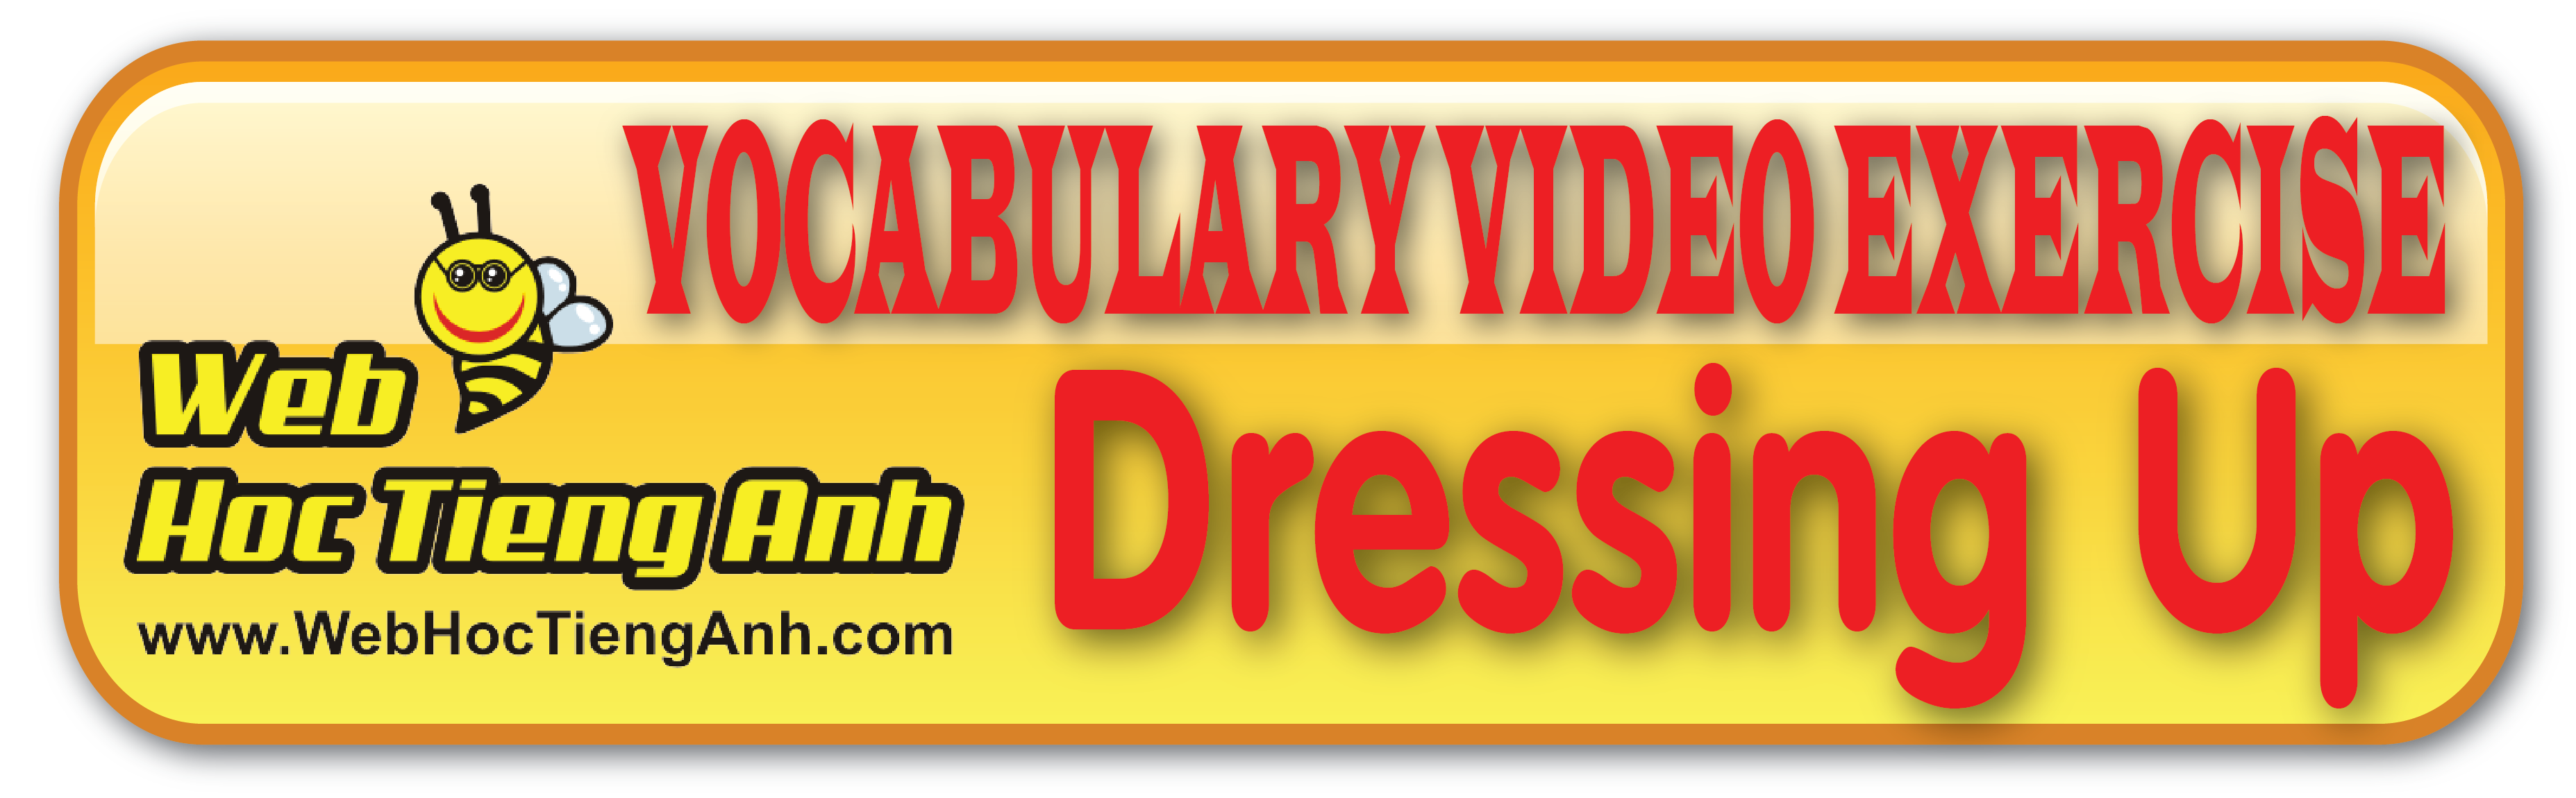 Learning Vocabulary Video: Dressing up